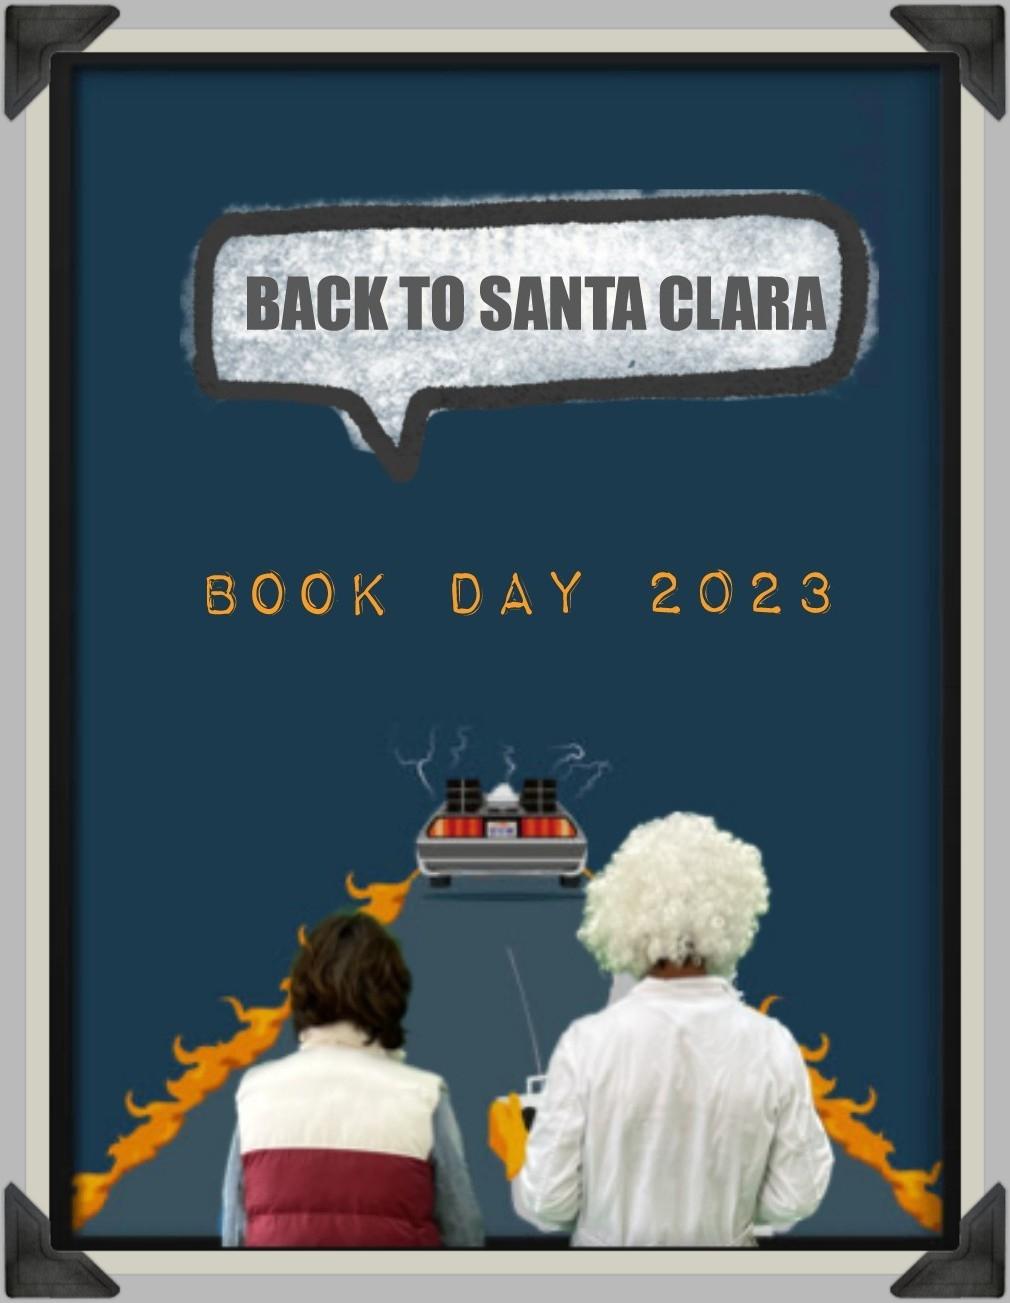 BOOK DAY 2023